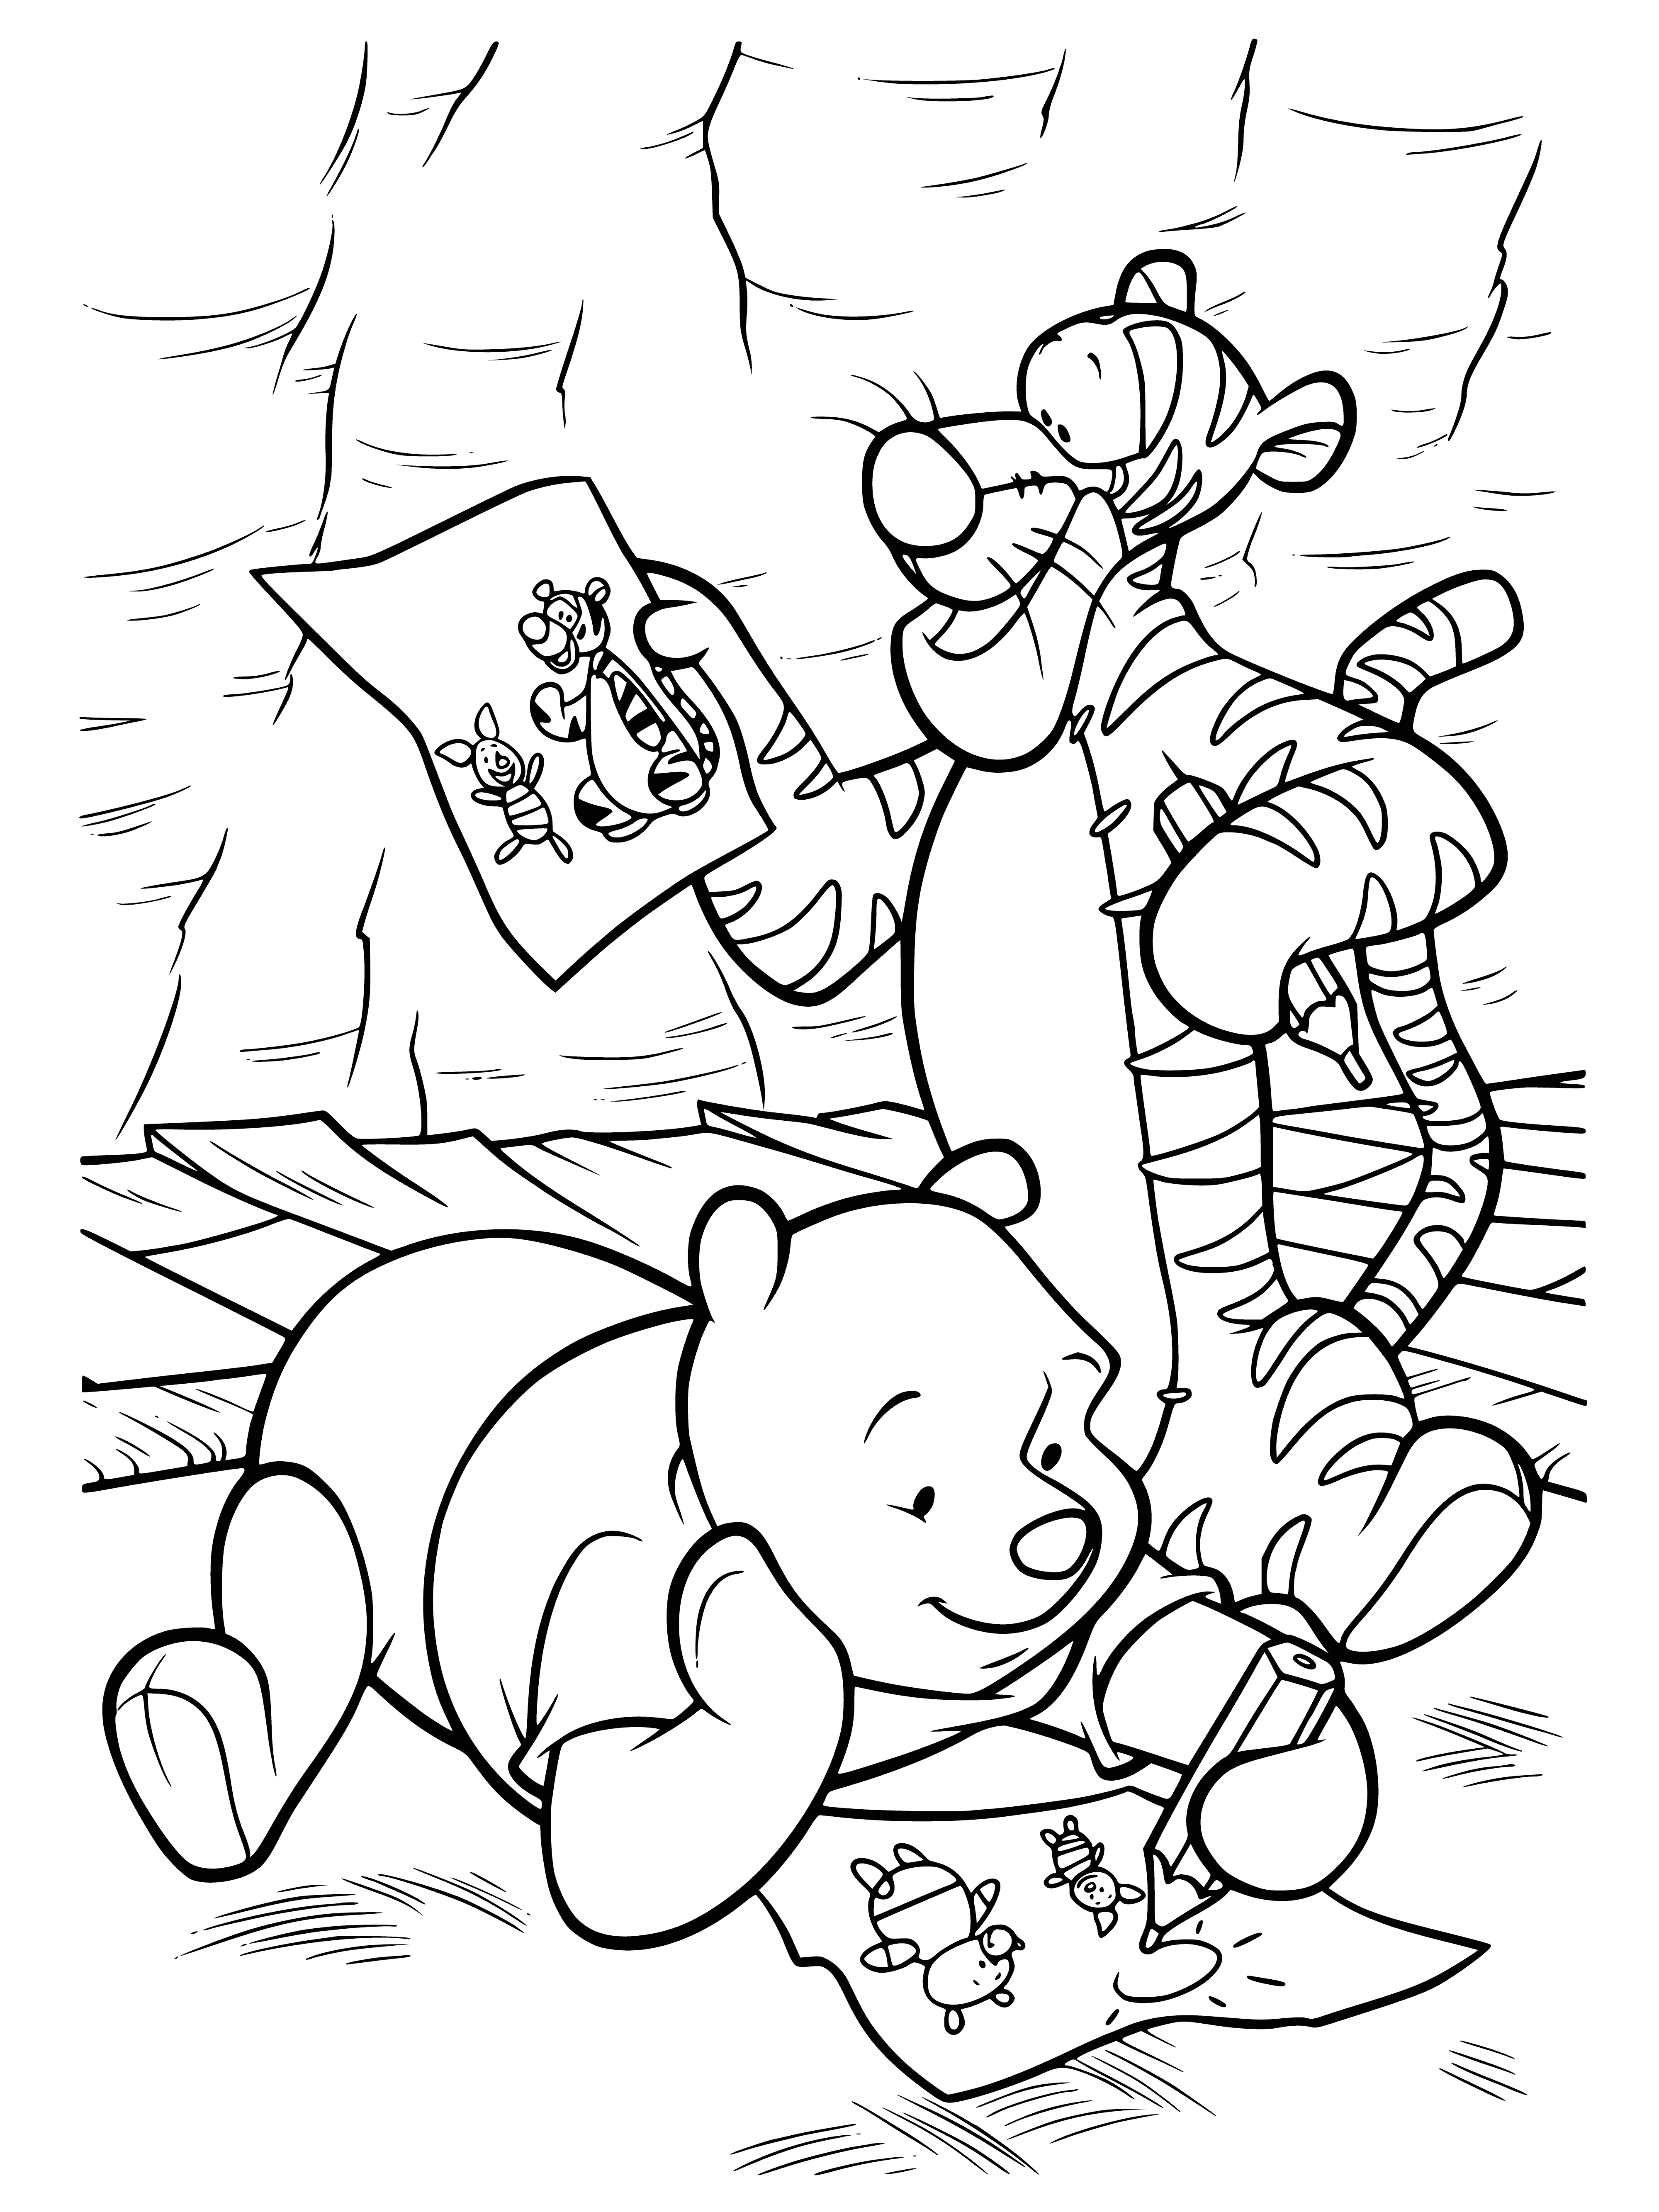 coloring page: A tree with a hollowed out trunk holds a tiny yellow bear and a red bird in a tranquil, dreamy landscape.